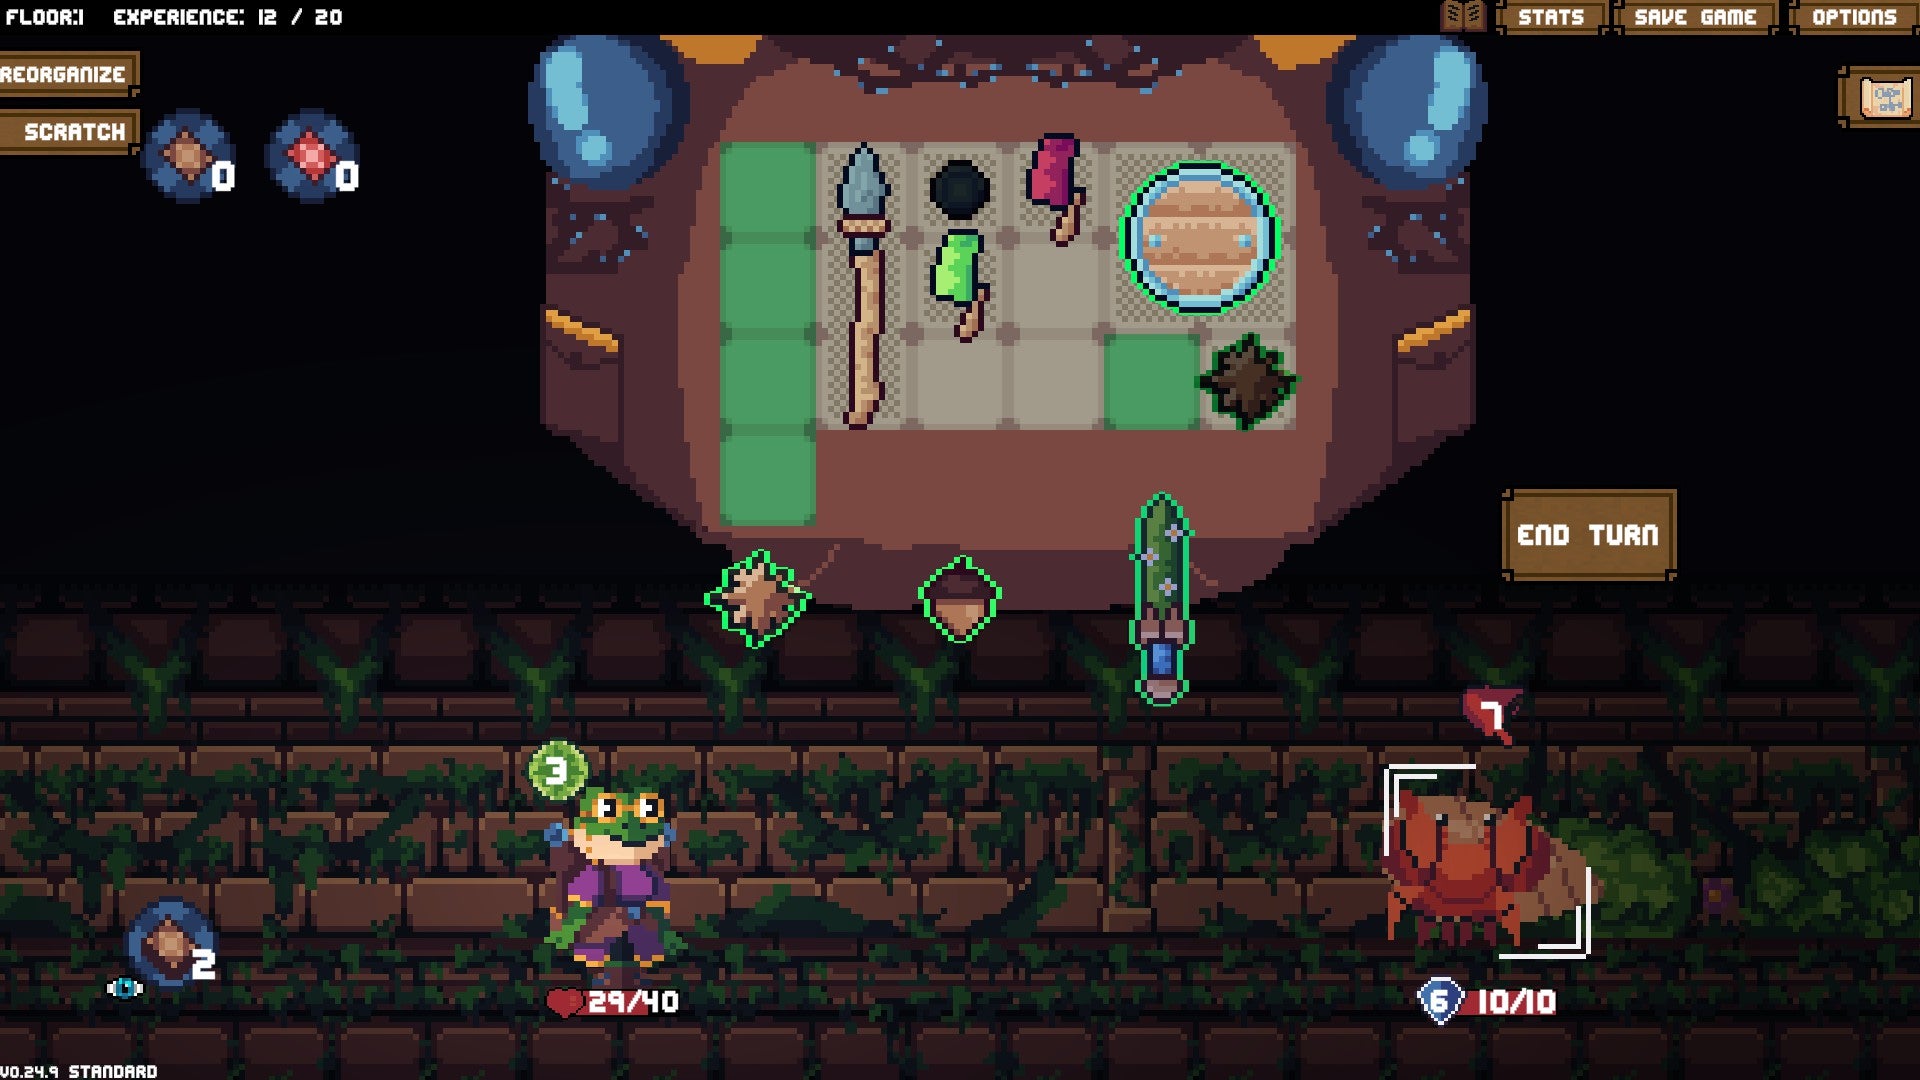 A small frog character stands underneath a huge open backpack that's filling half the screen, organized into tiles, and there are a variety of weapons and items filling those tiles.